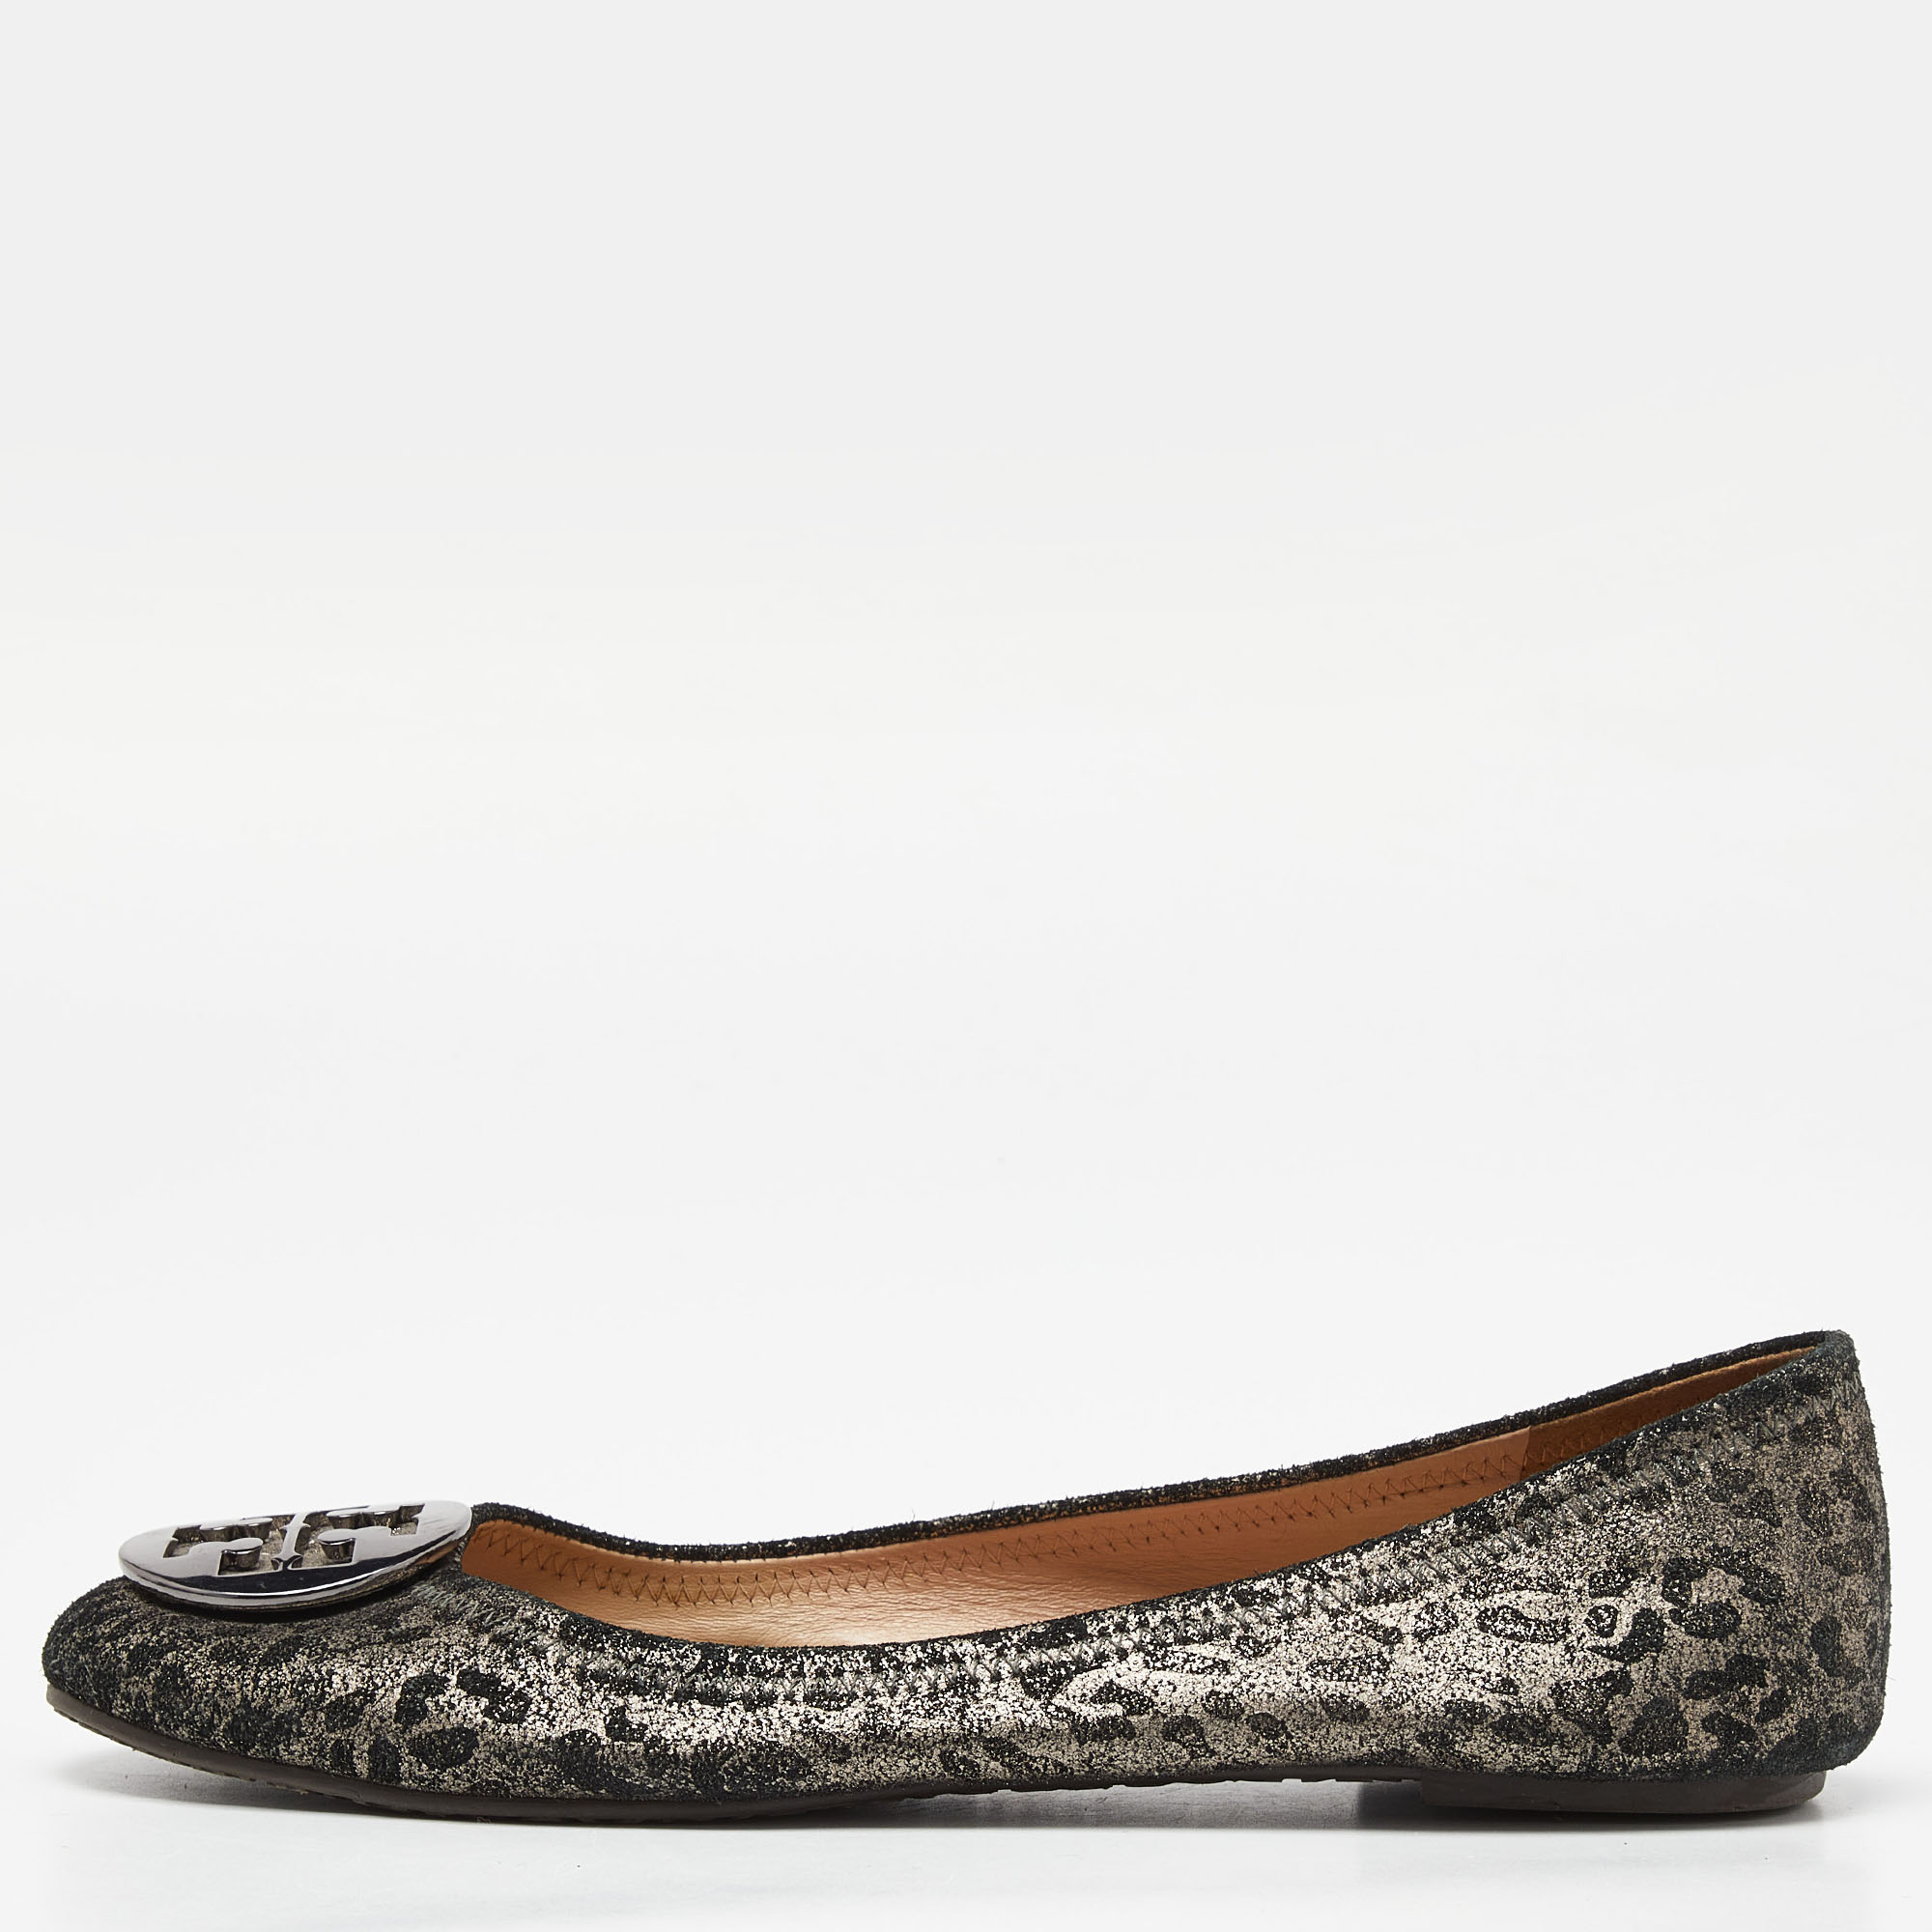 

Tory Burch Printed Suede Luisa Micro Ballet Flats Size 40, Black